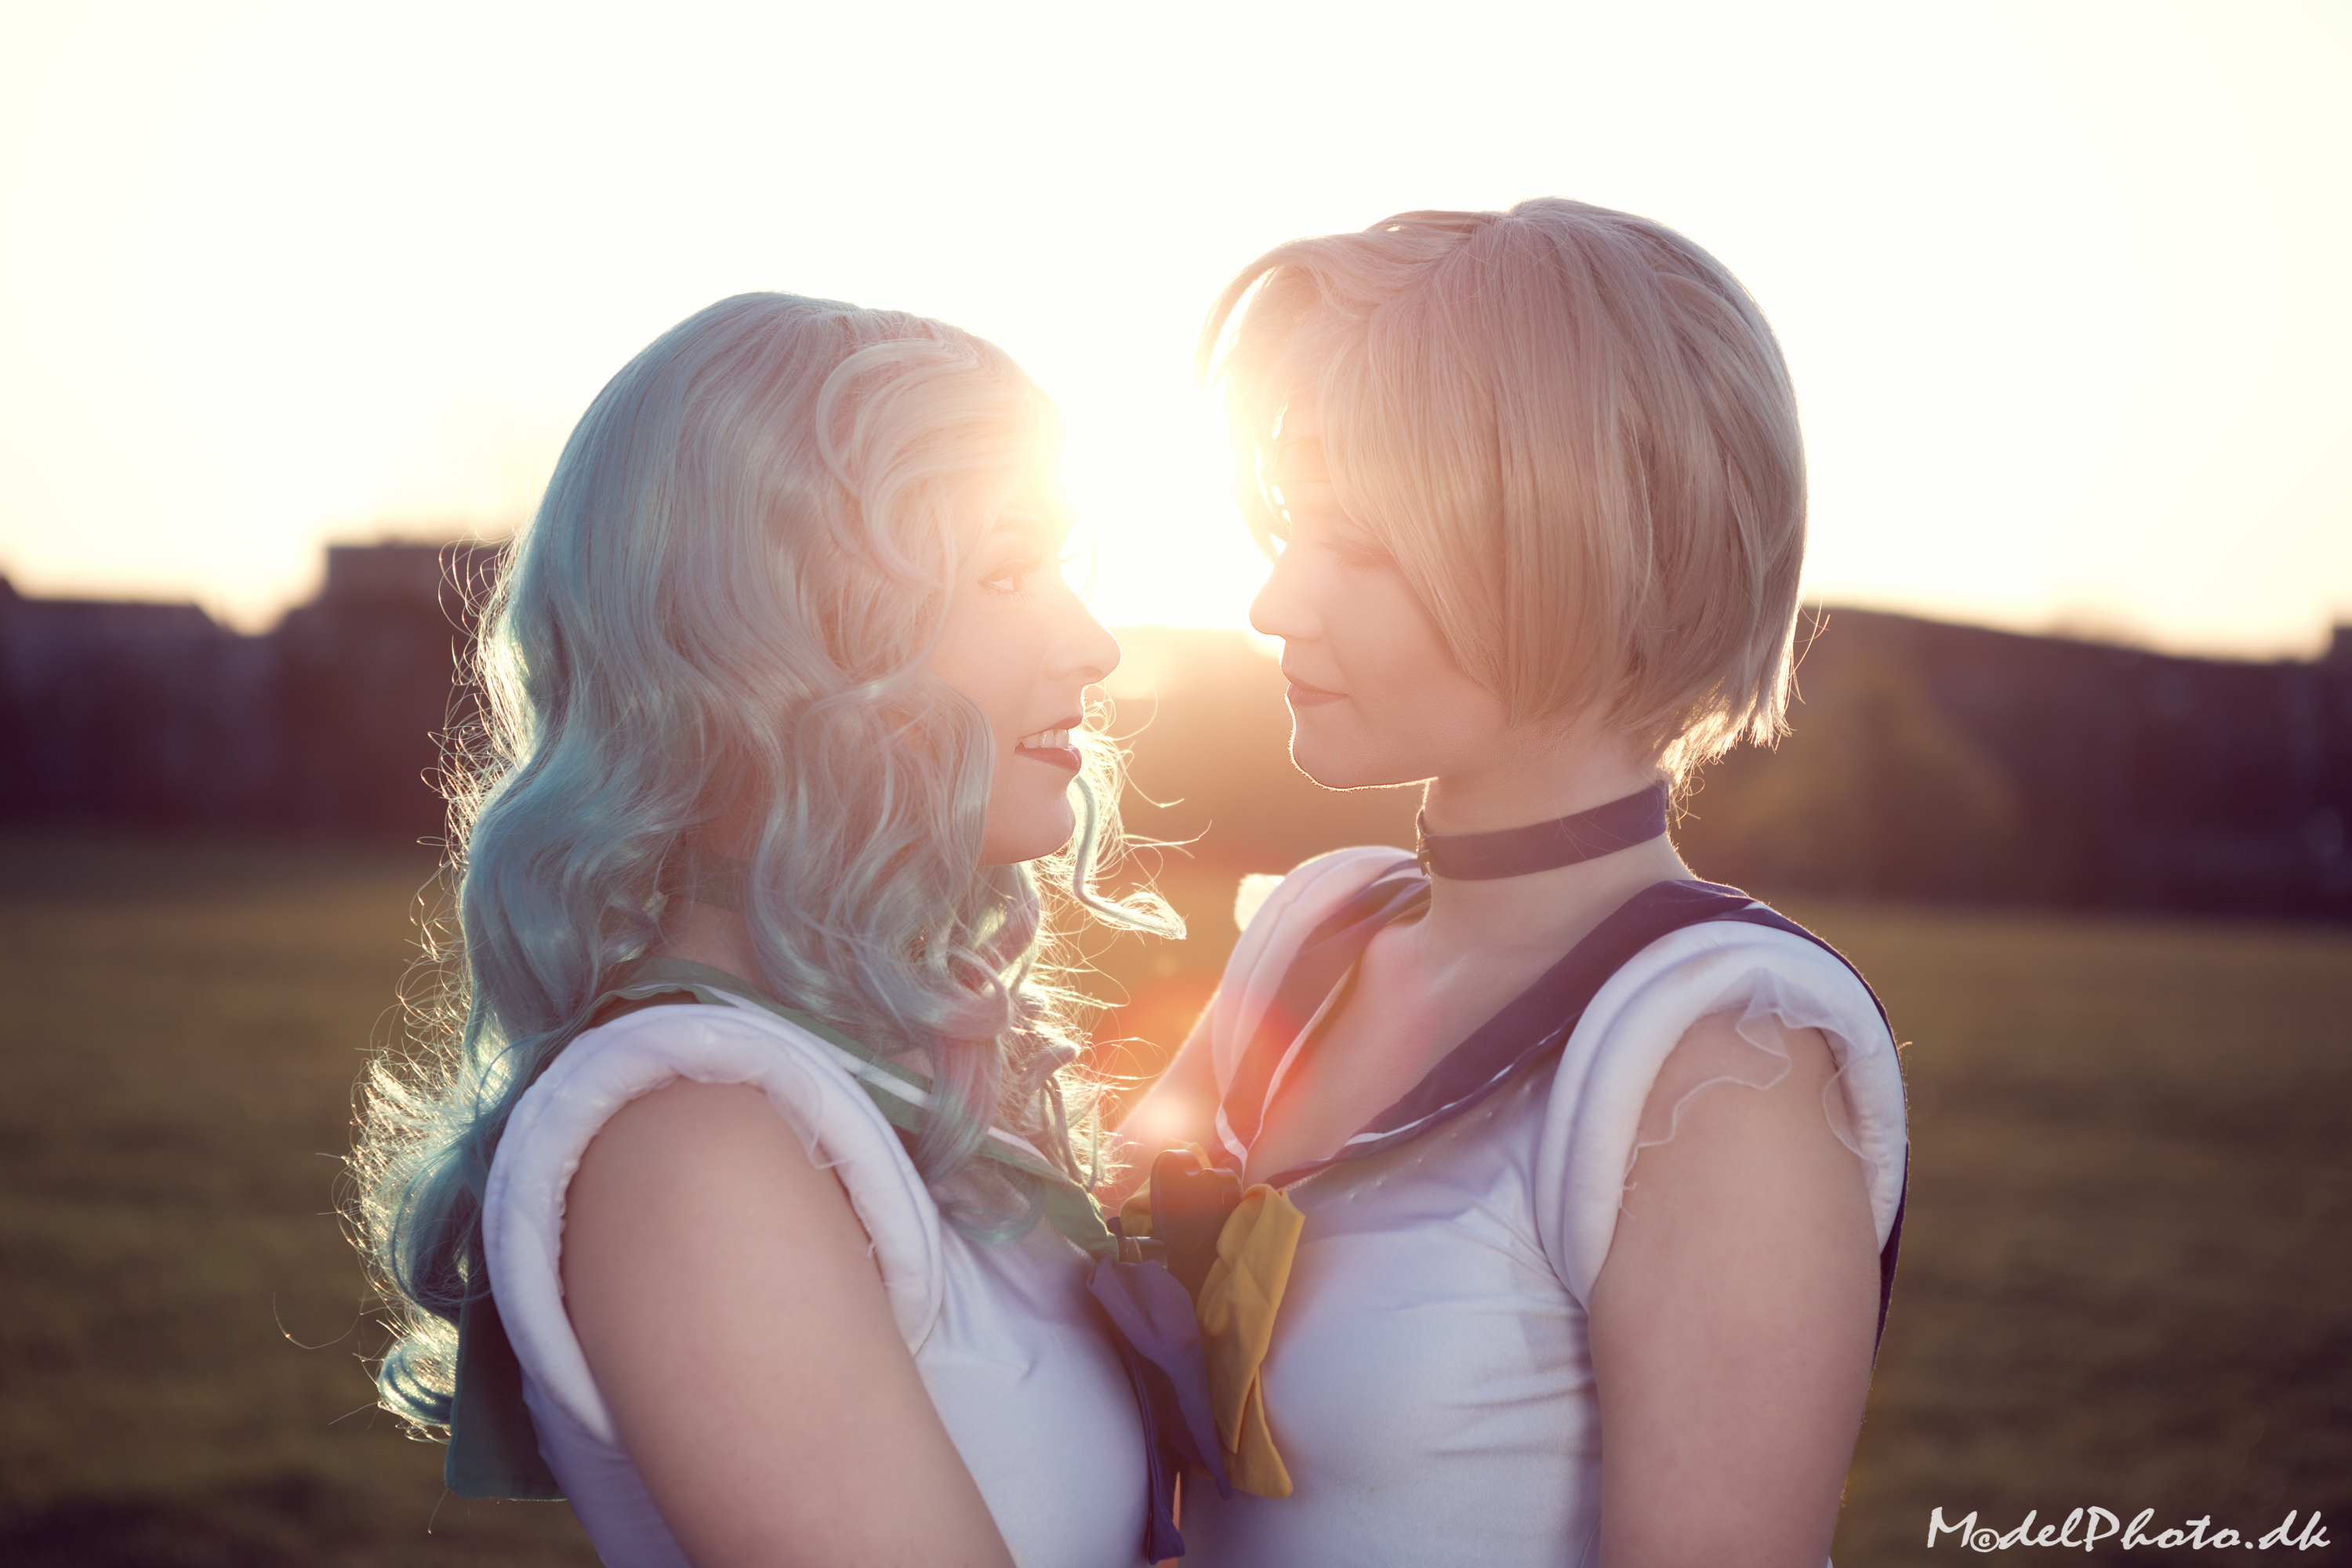 And it wasn't a coincidence they chose the Sailor Moon lesbian couple to cosplay.